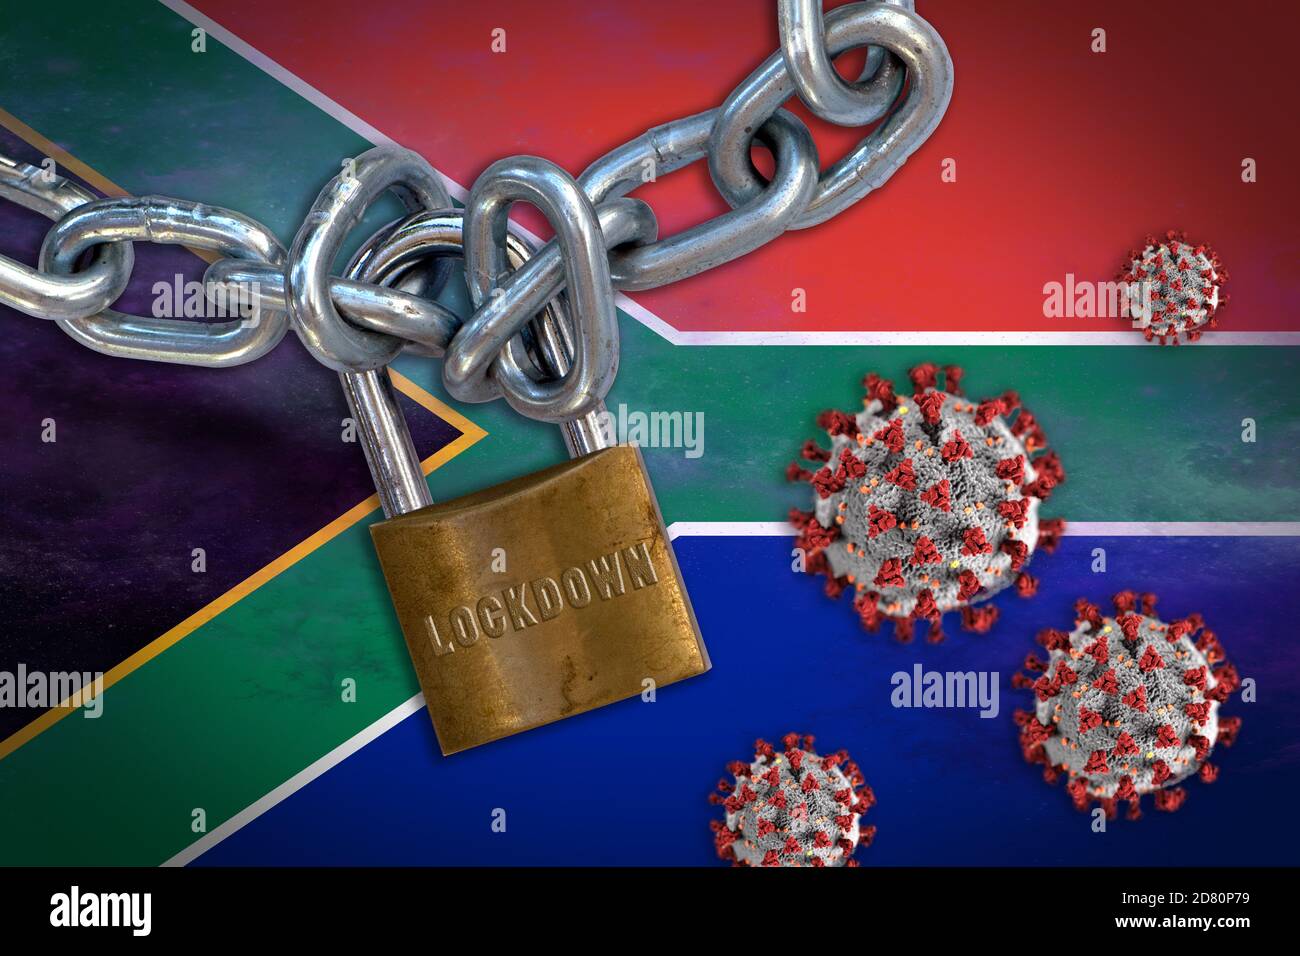 Concept of Coronavirus lockdown in South Africa, with Covid-19 particles overshadowing flag of South Africa. Stock Photo